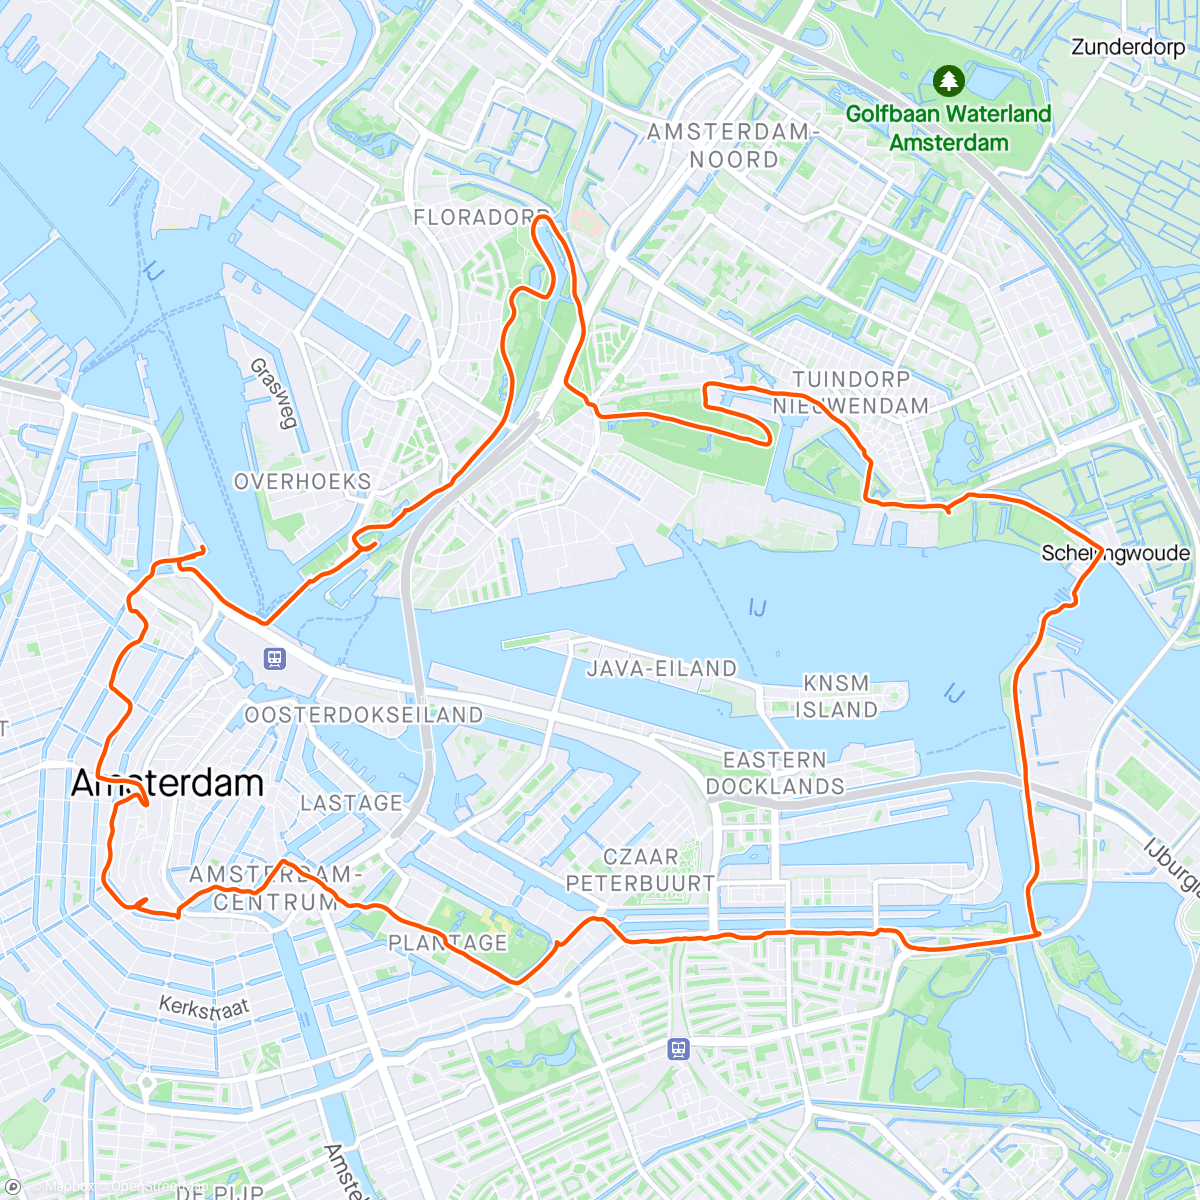 「Dutch Pancake breakfast, ferry to North Amsterdam, forest walk, over the locks, Brewerij, Beer Temple, then beer by the canal.」活動的地圖